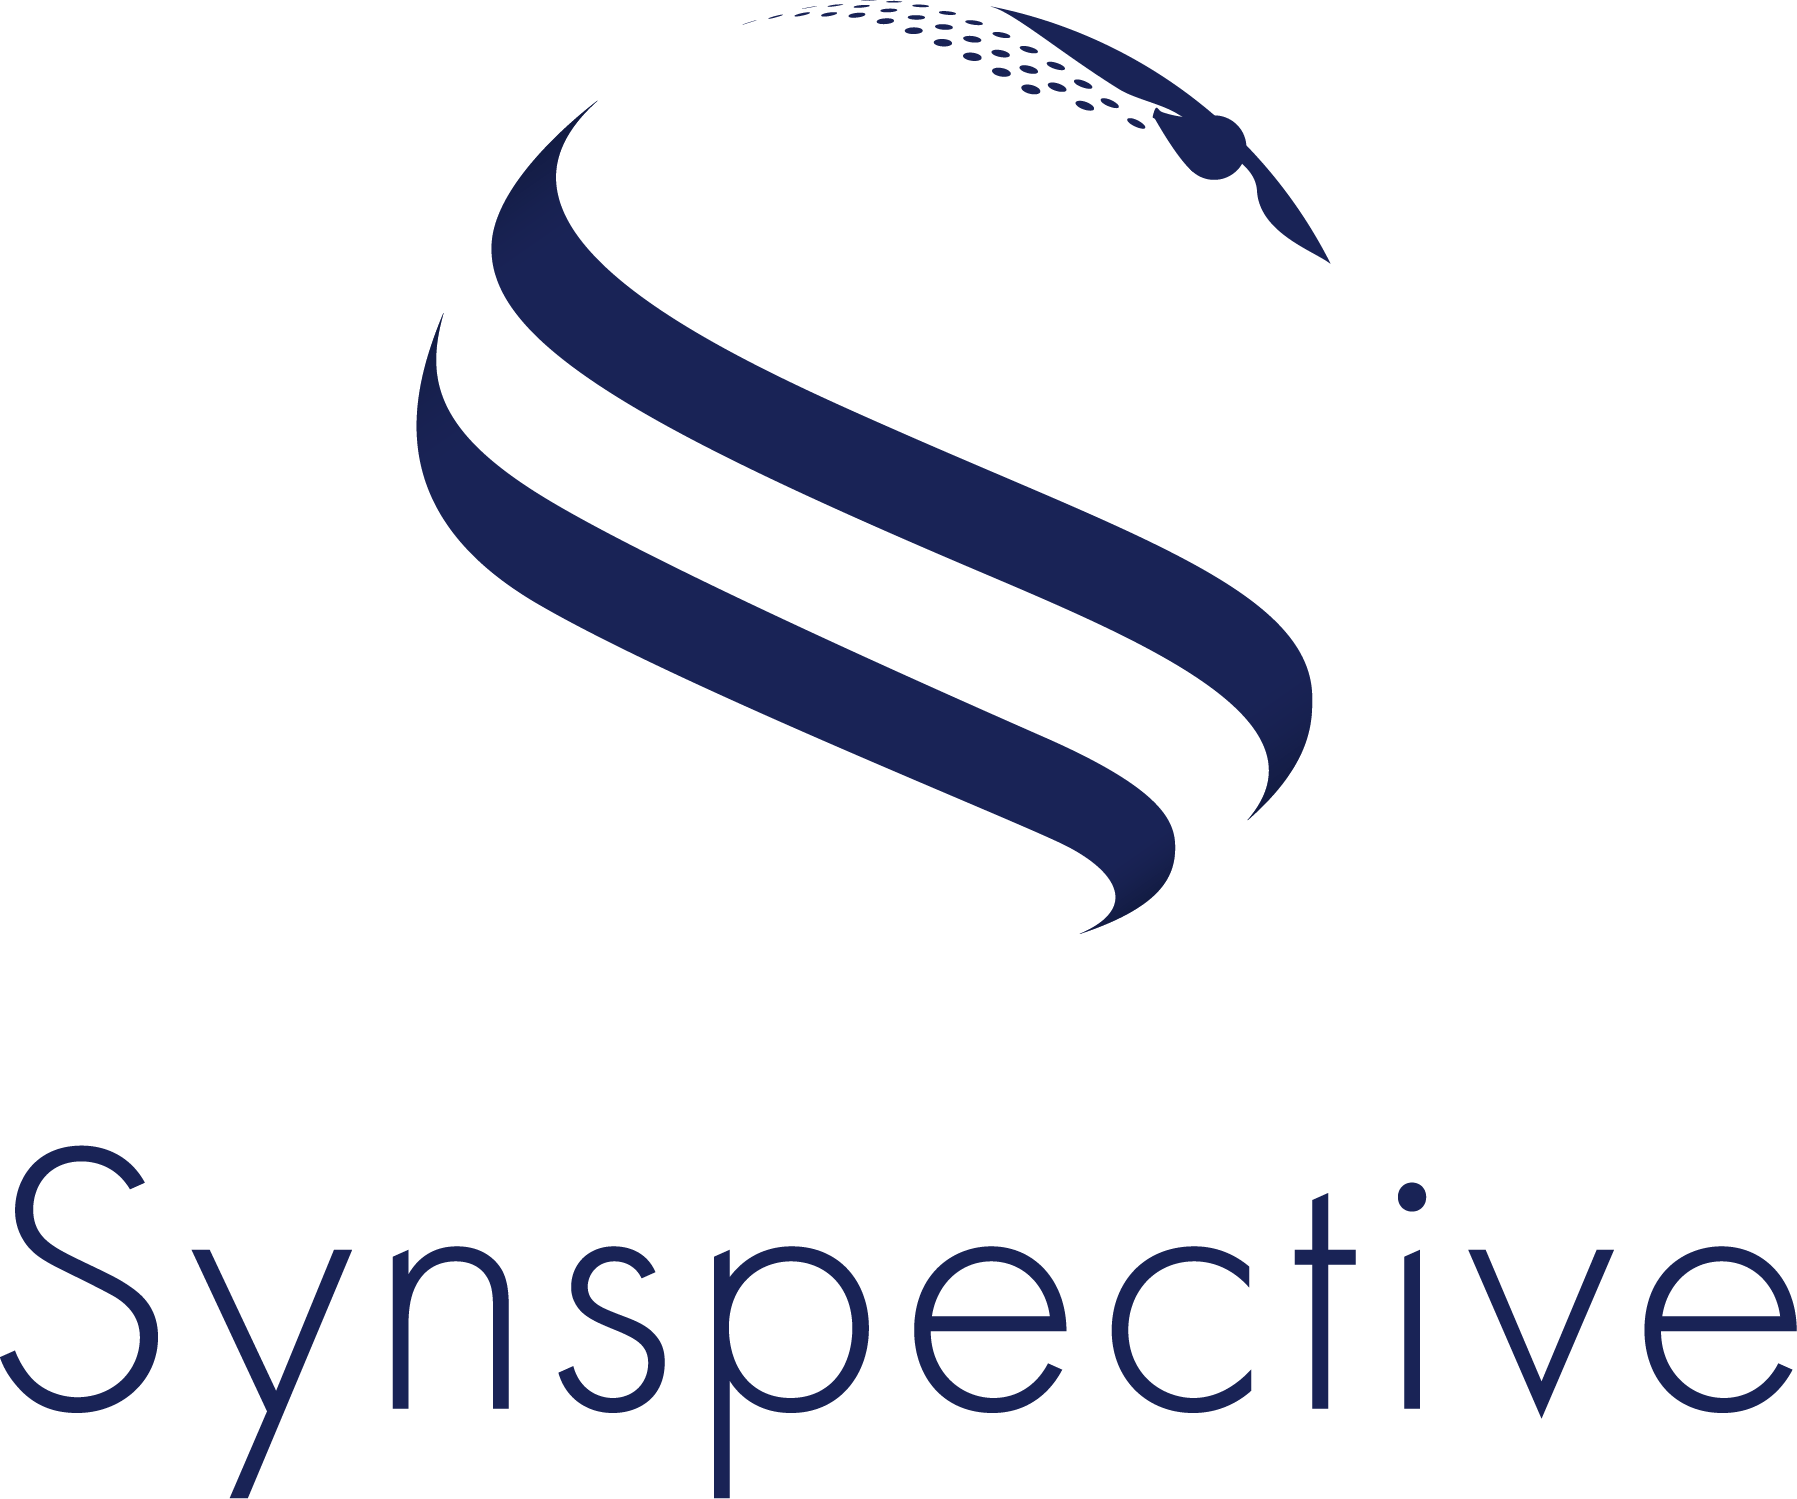 The logo of Synspective.